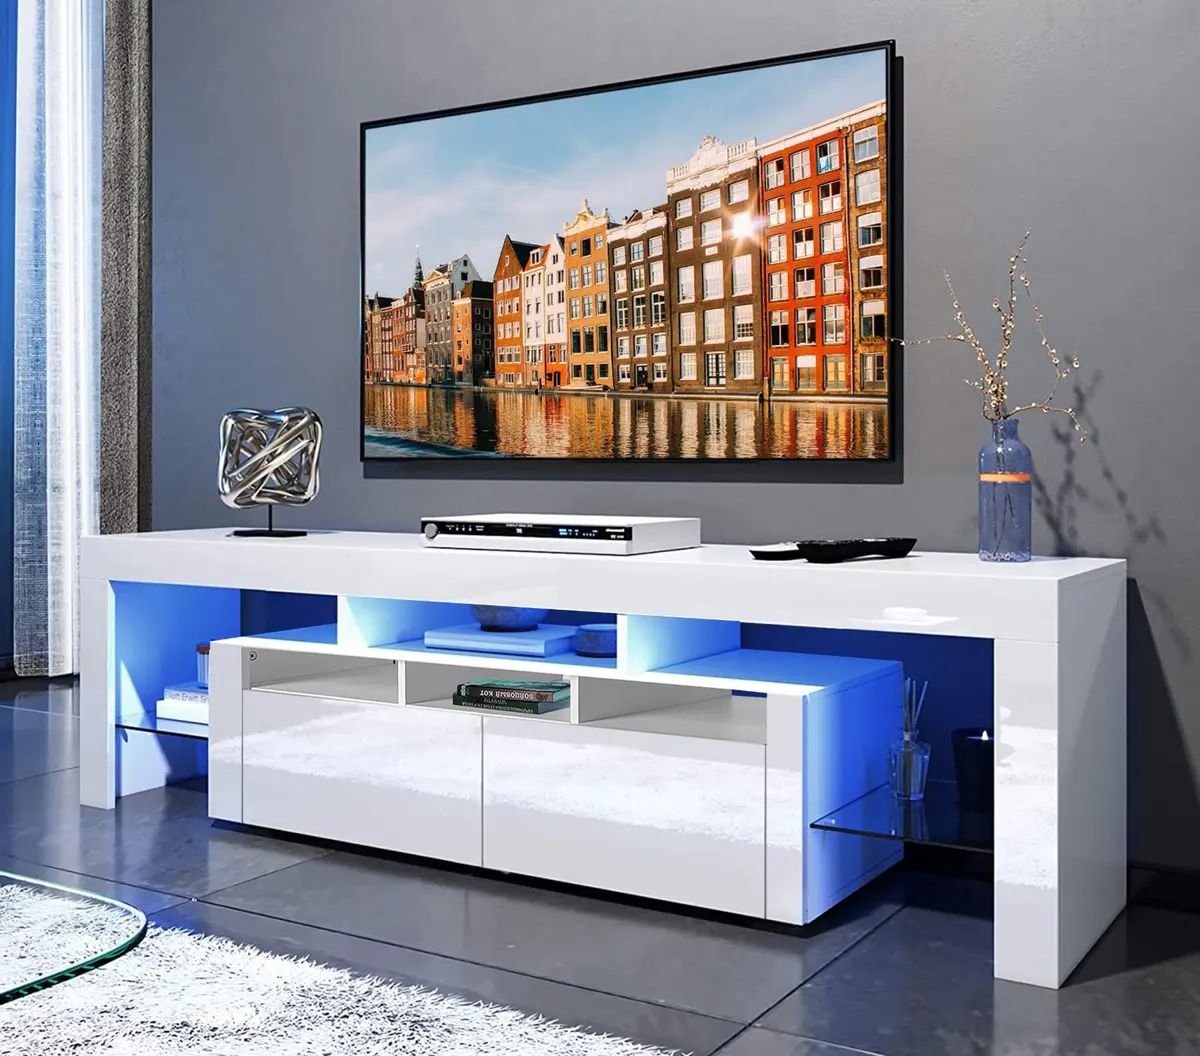 Modern Tv Unit Cabinet White Led Tv Stand High Gloss Doors Living Room Rgb  Light | Ebay Intended For Tv Stands With Lights (Gallery 5 of 20)